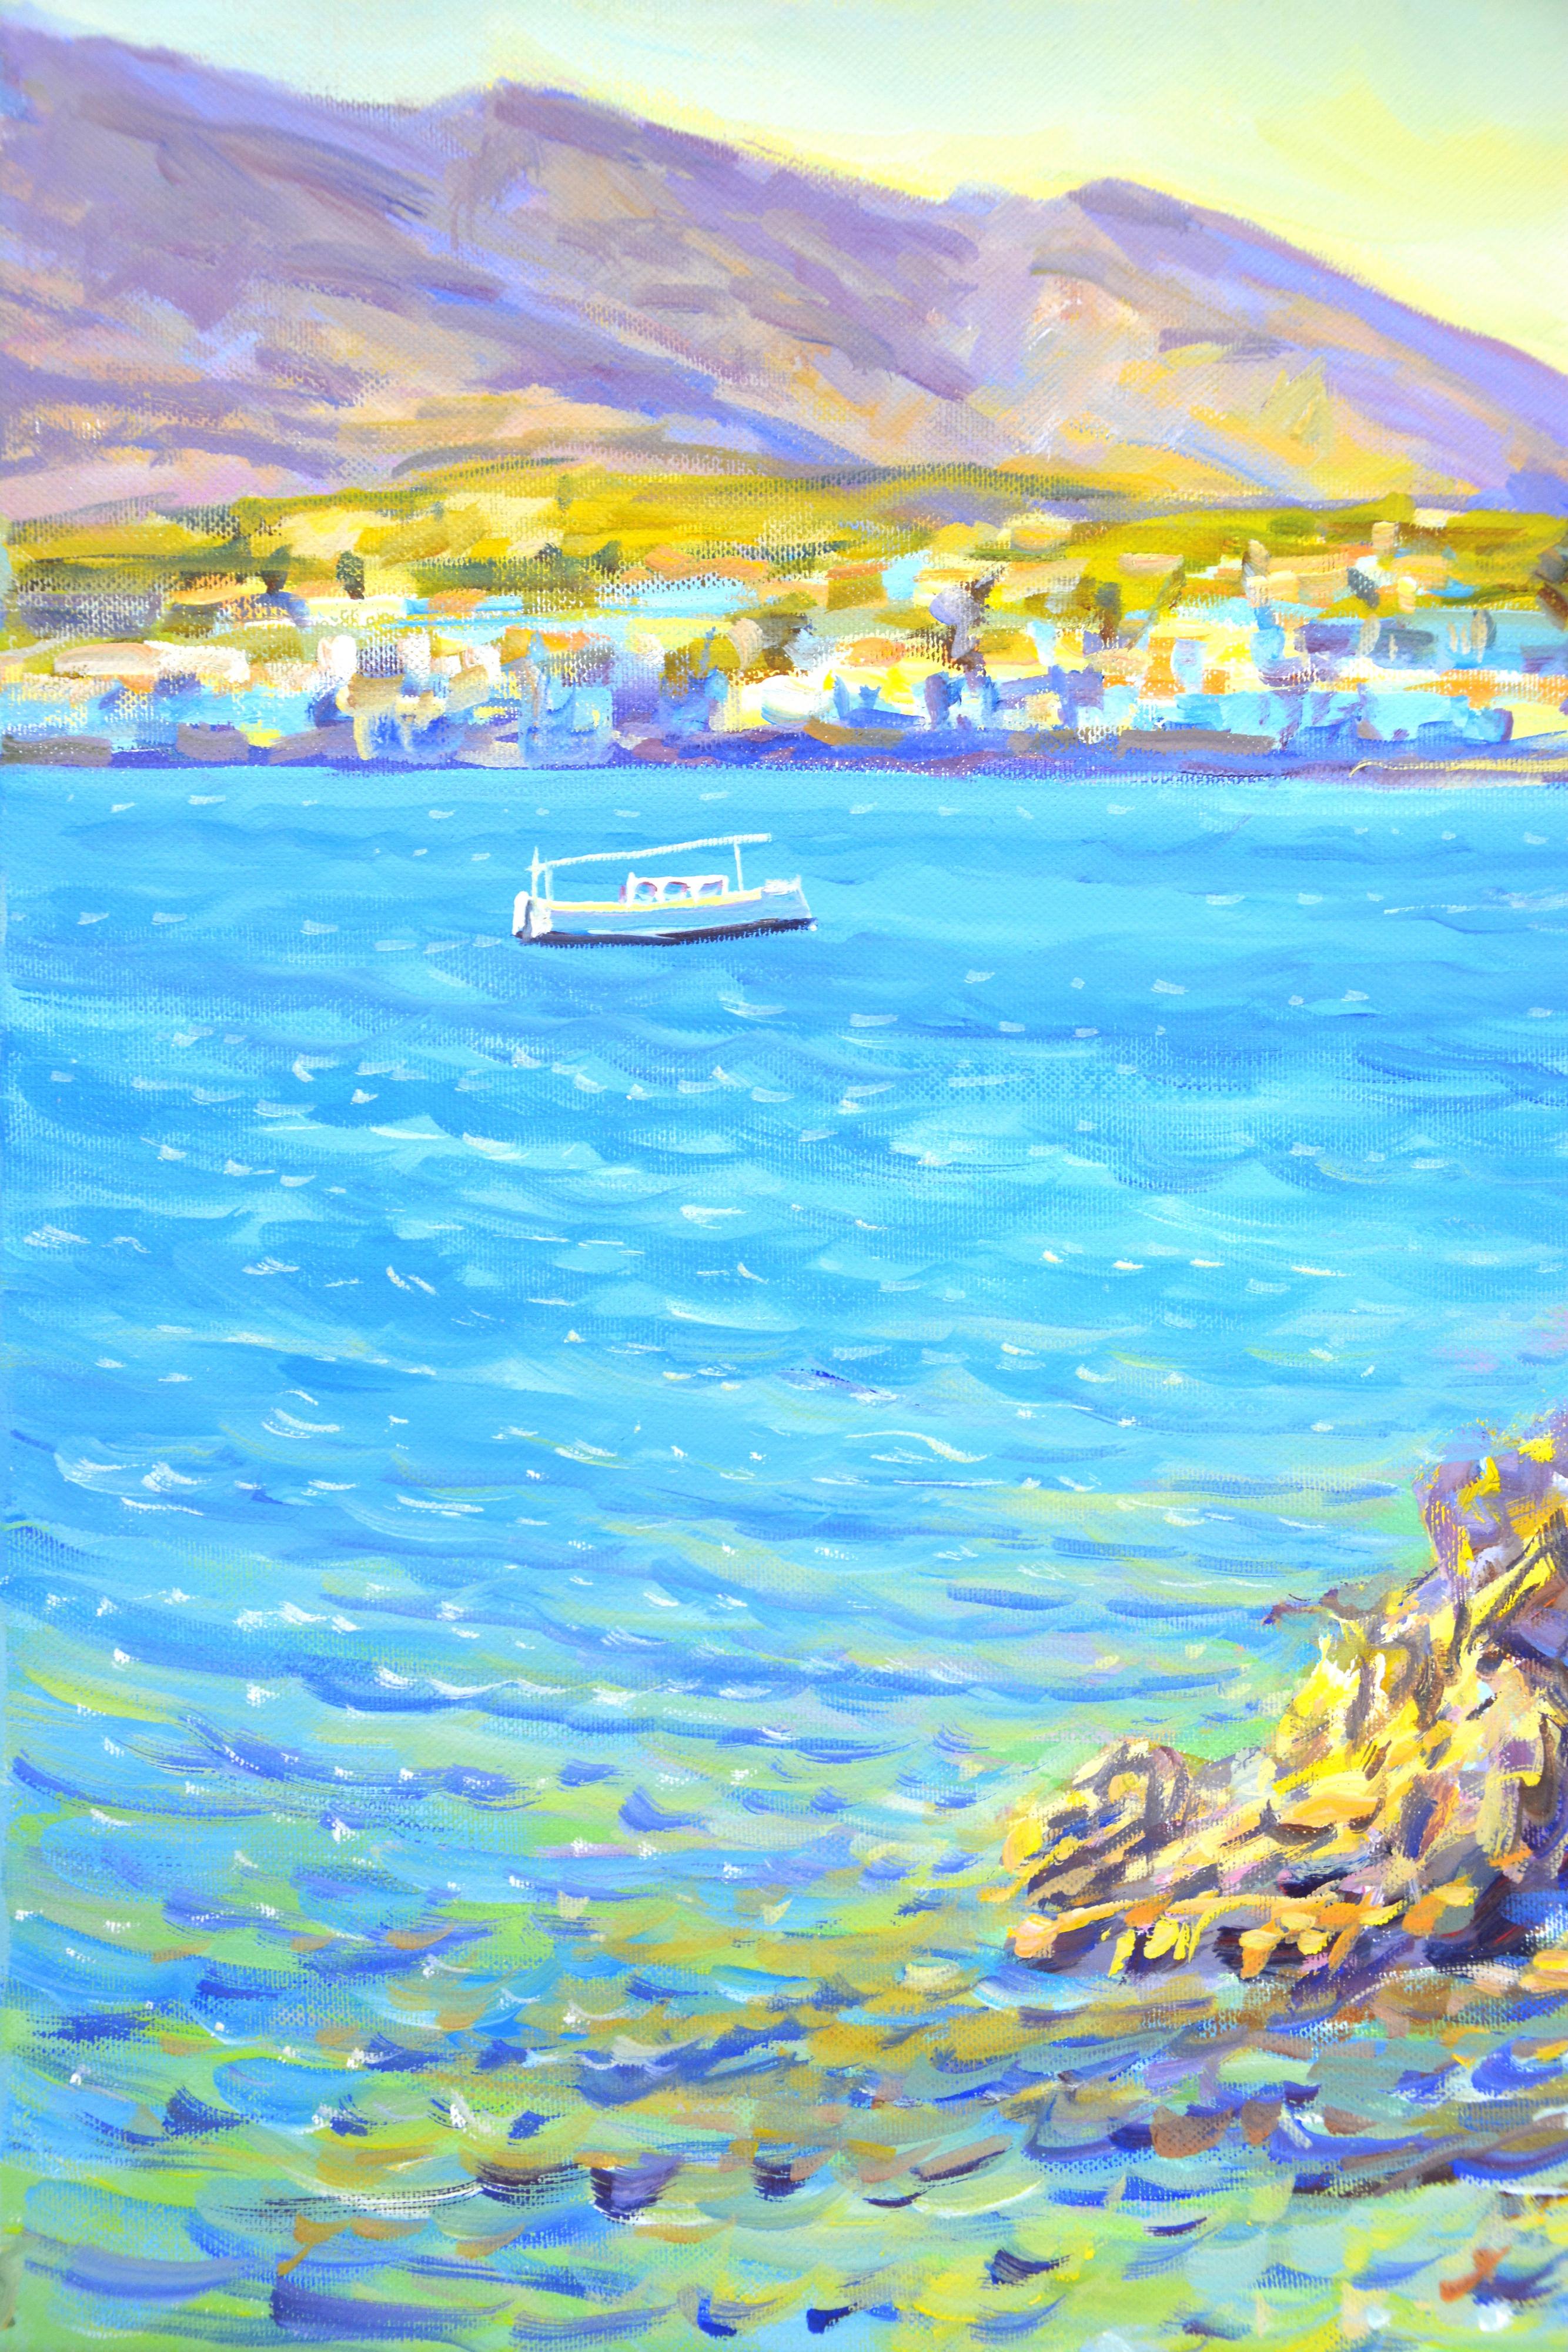 A sunny day at the sea, clear skies, mountains, stones, a beach, an atmosphere of relaxation. Through my art I want to share with others good energy, joy of life and positive. A rich palette of blue, green, yellow and white colors emphasizes the